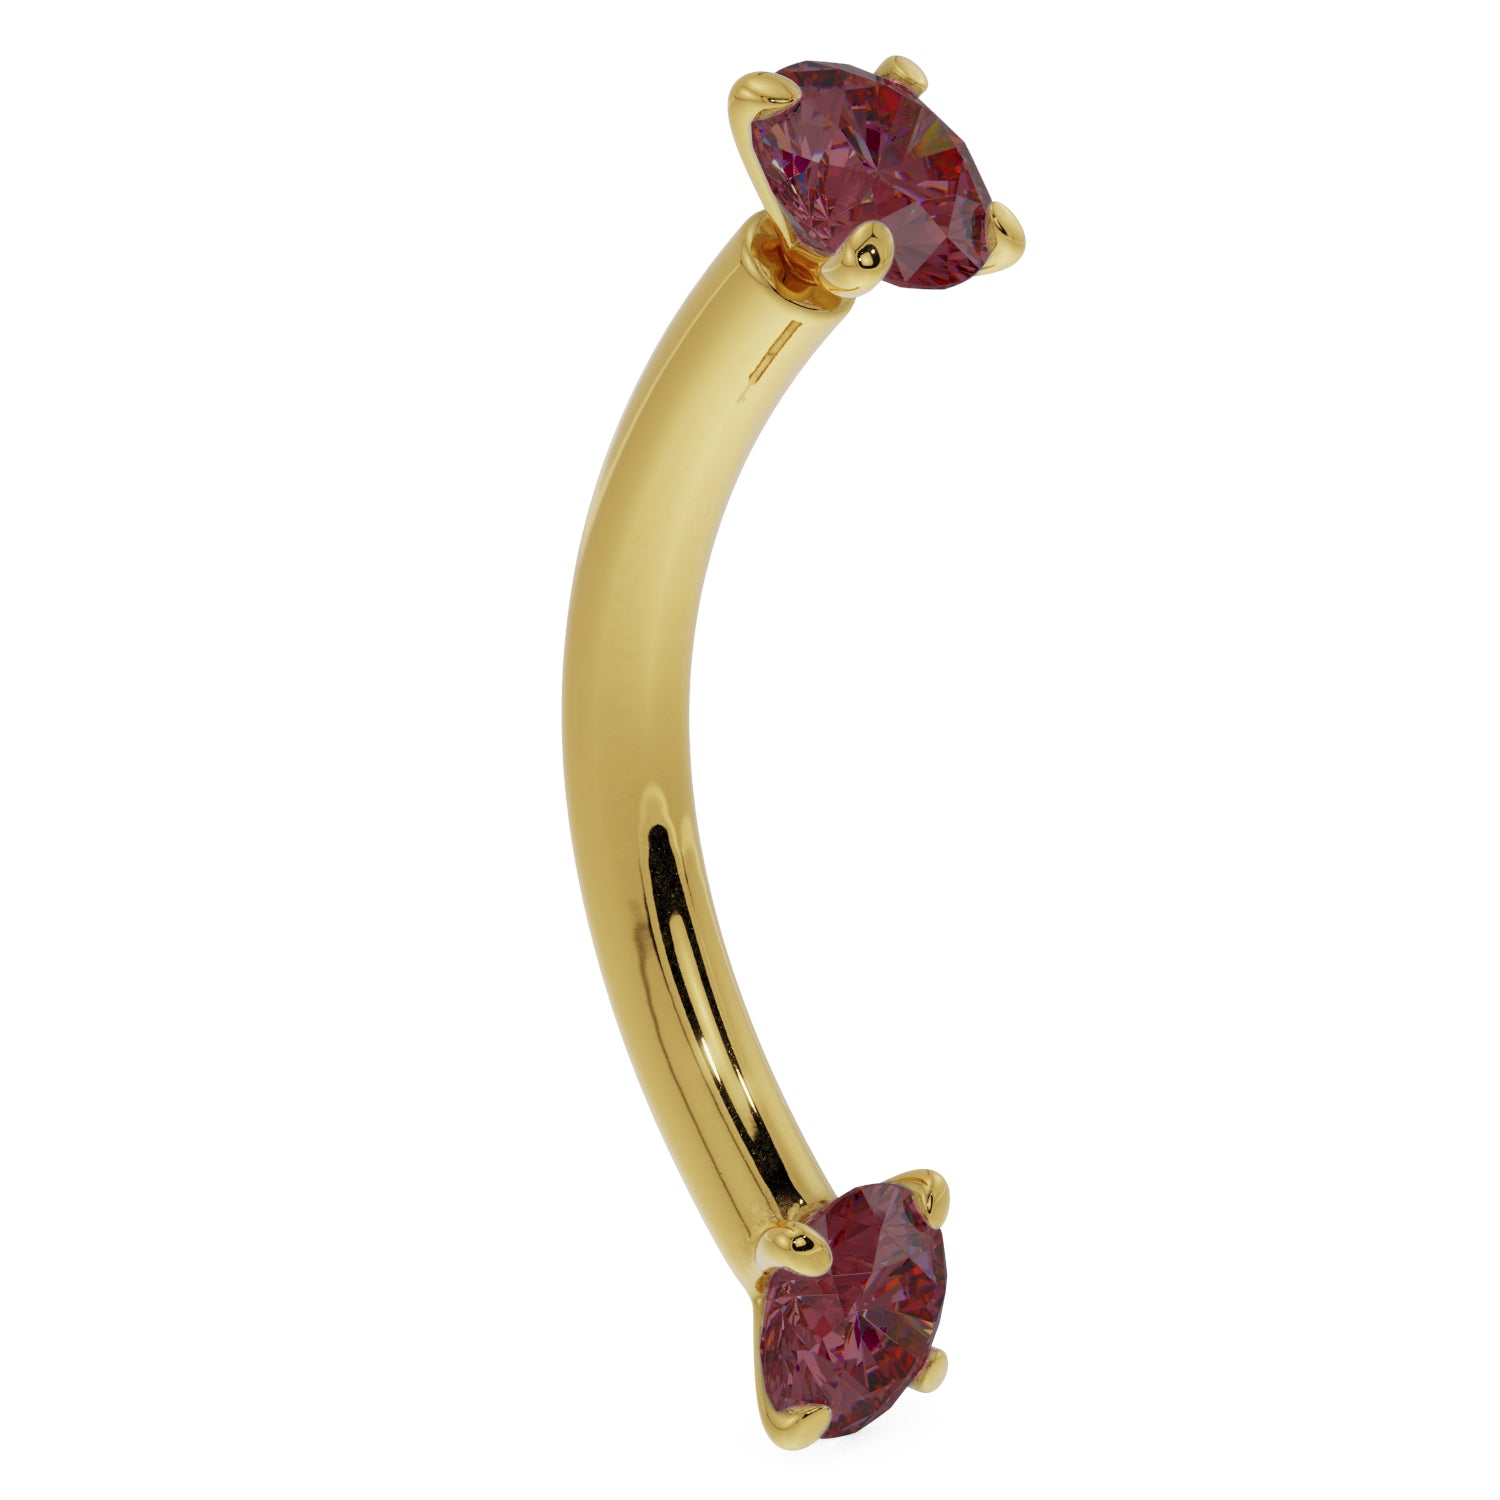 Dainty Ruby Prong-Set Curved Barbell for Eyebrow Rook Belly